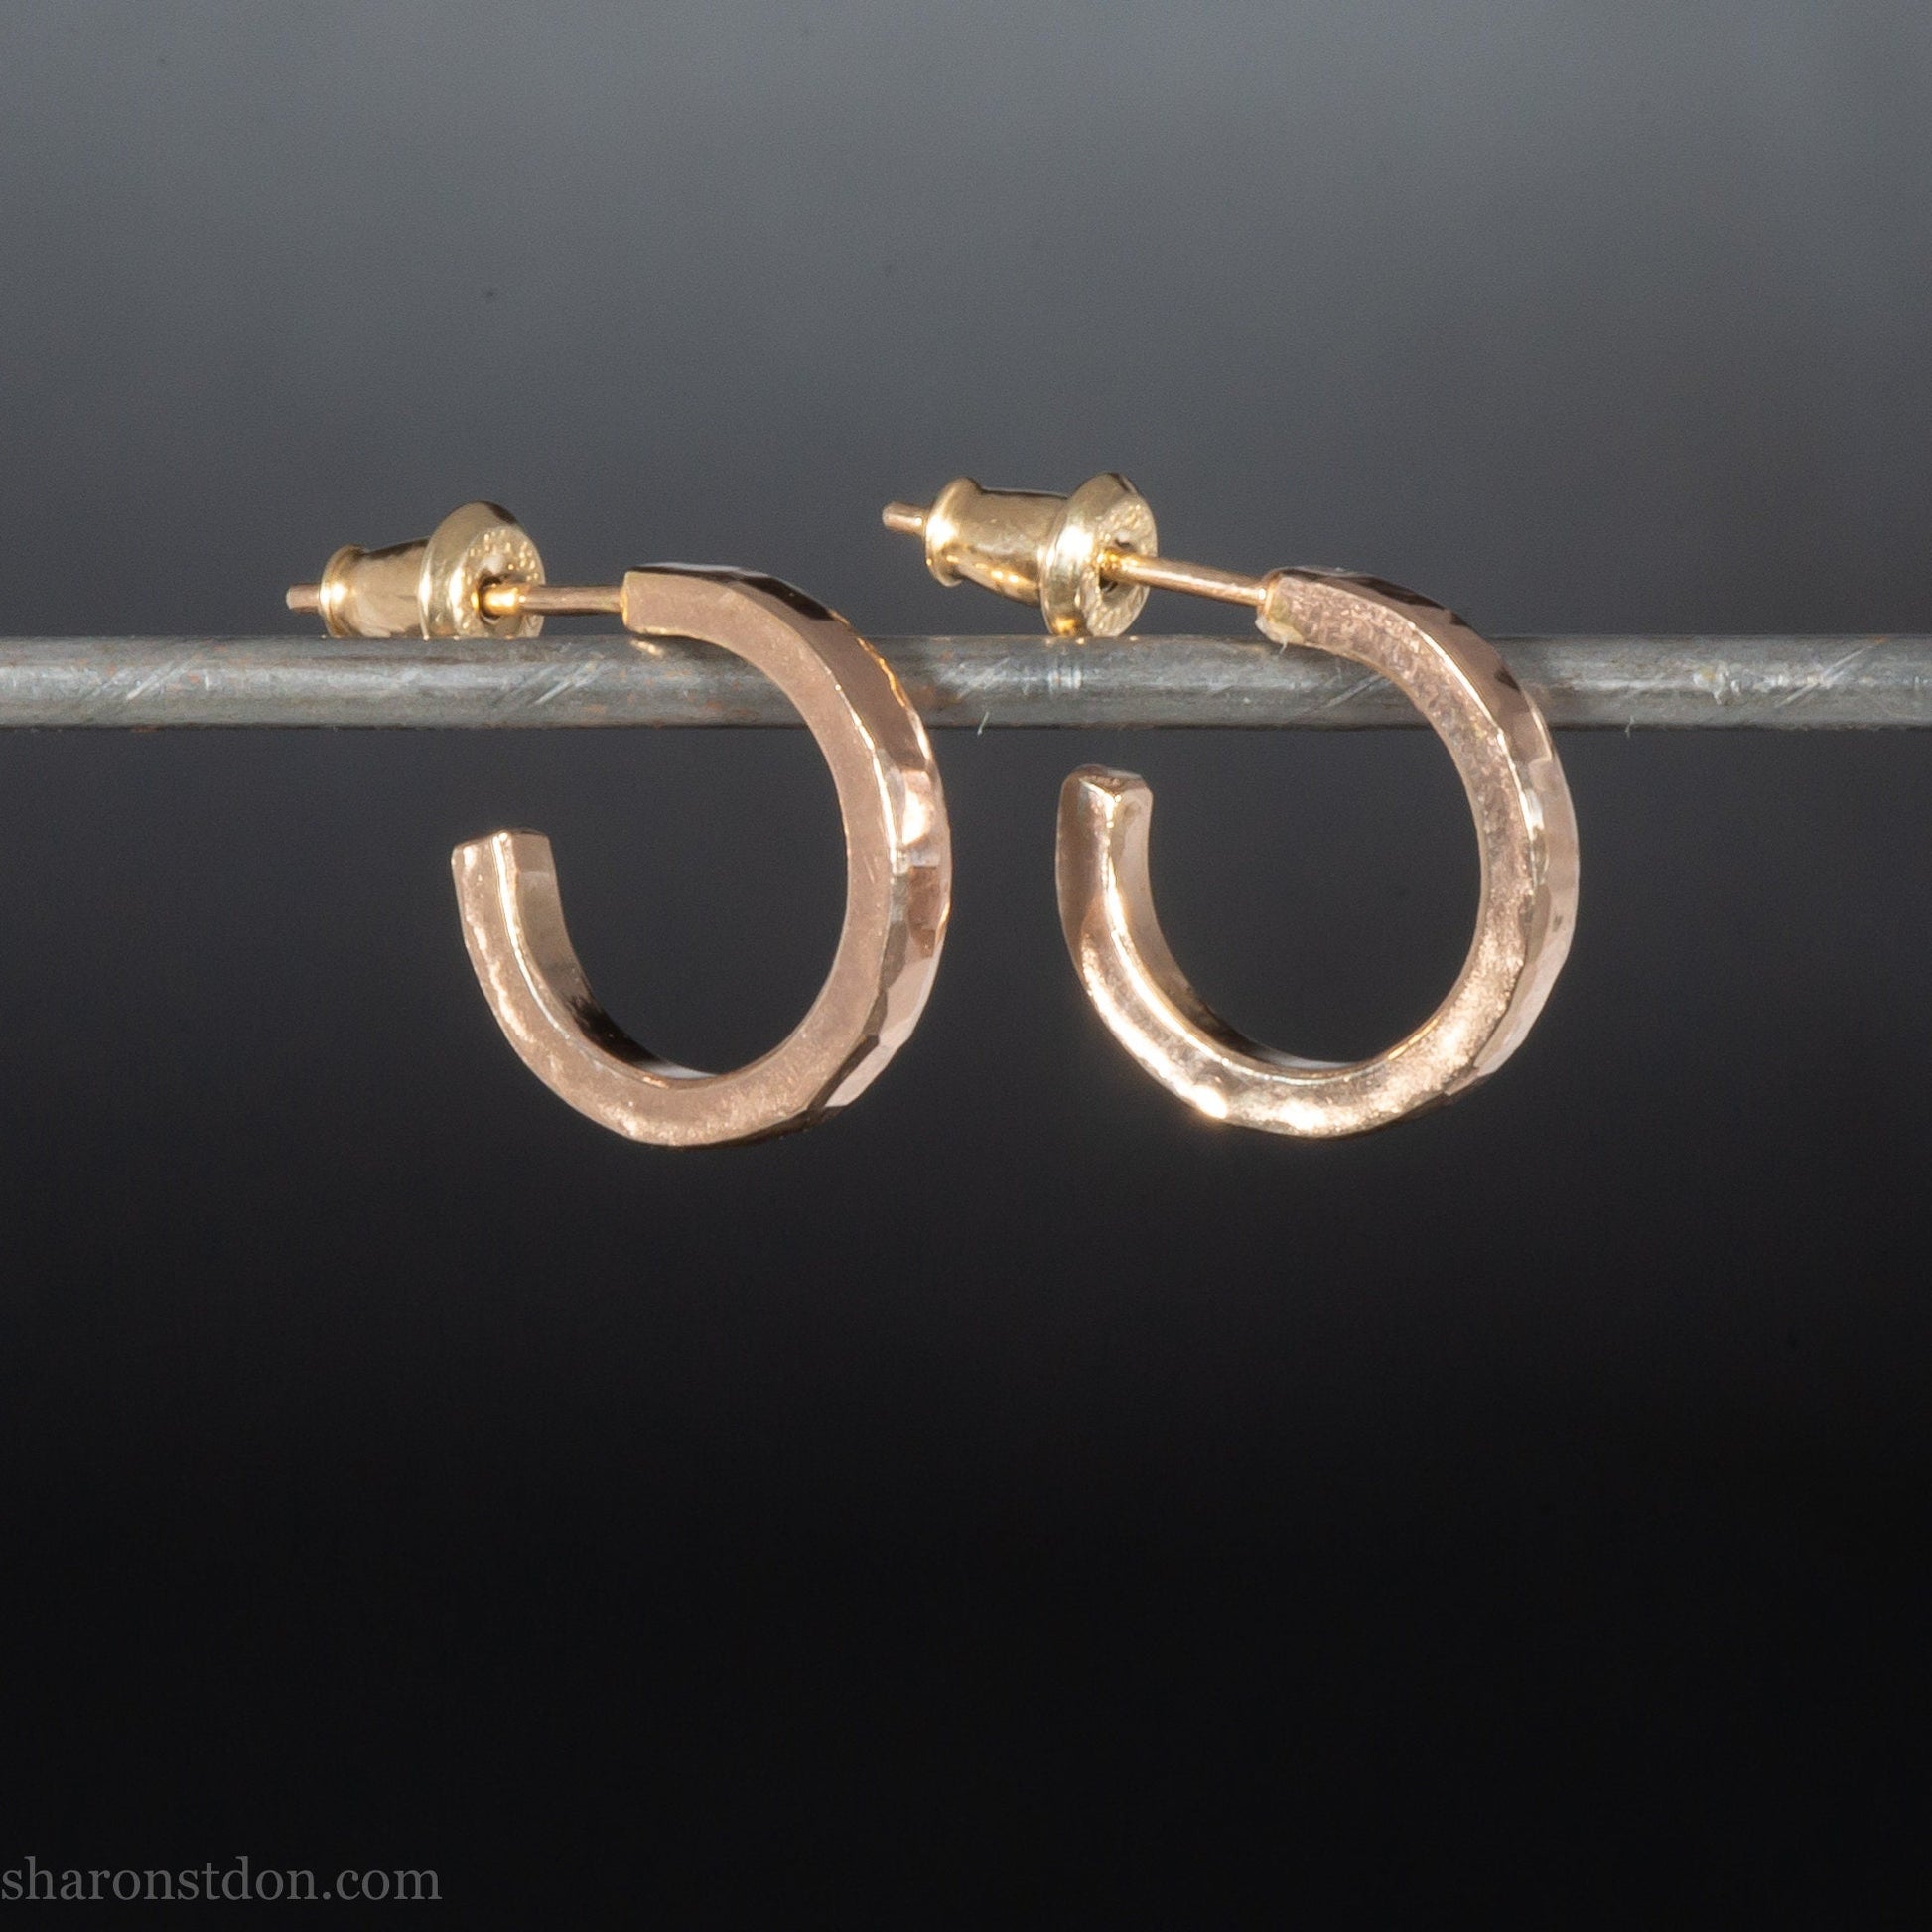 Solid 22k gold hoop earrings handmade in North America by Sharon Saint Don.  14mm diameter round with hammered texture.  18k solid gold posts and locking backs. Handmade in the USA.